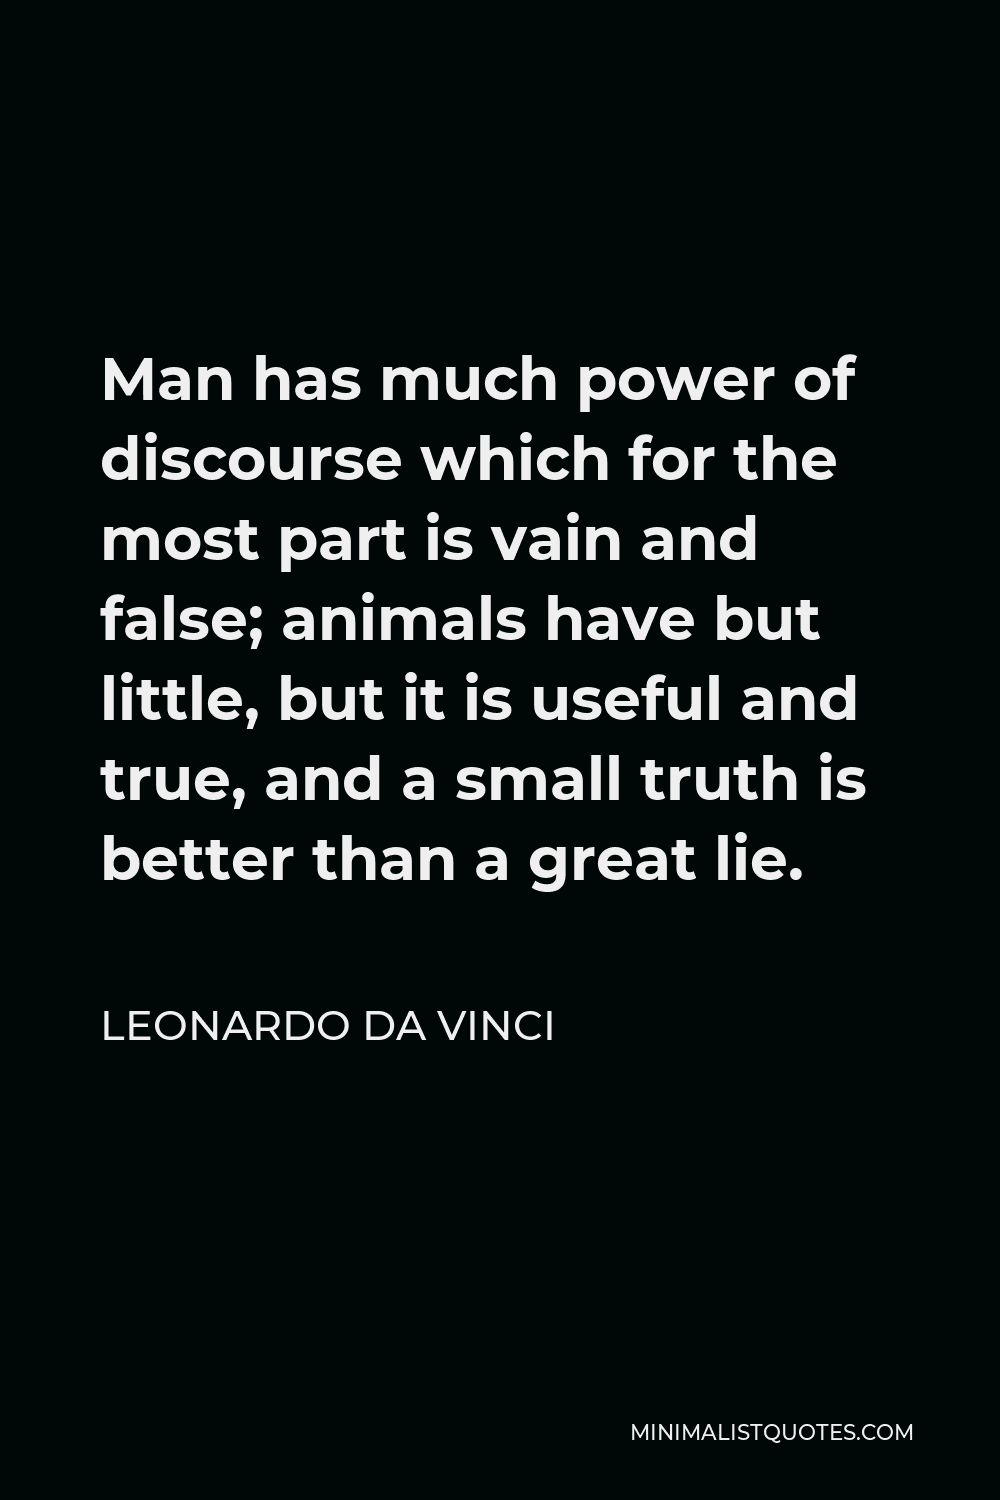 Leonardo da Vinci Quote - Man has much power of discourse which for the most part is vain and false; animals have but little, but it is useful and true, and a small truth is better than a great lie.